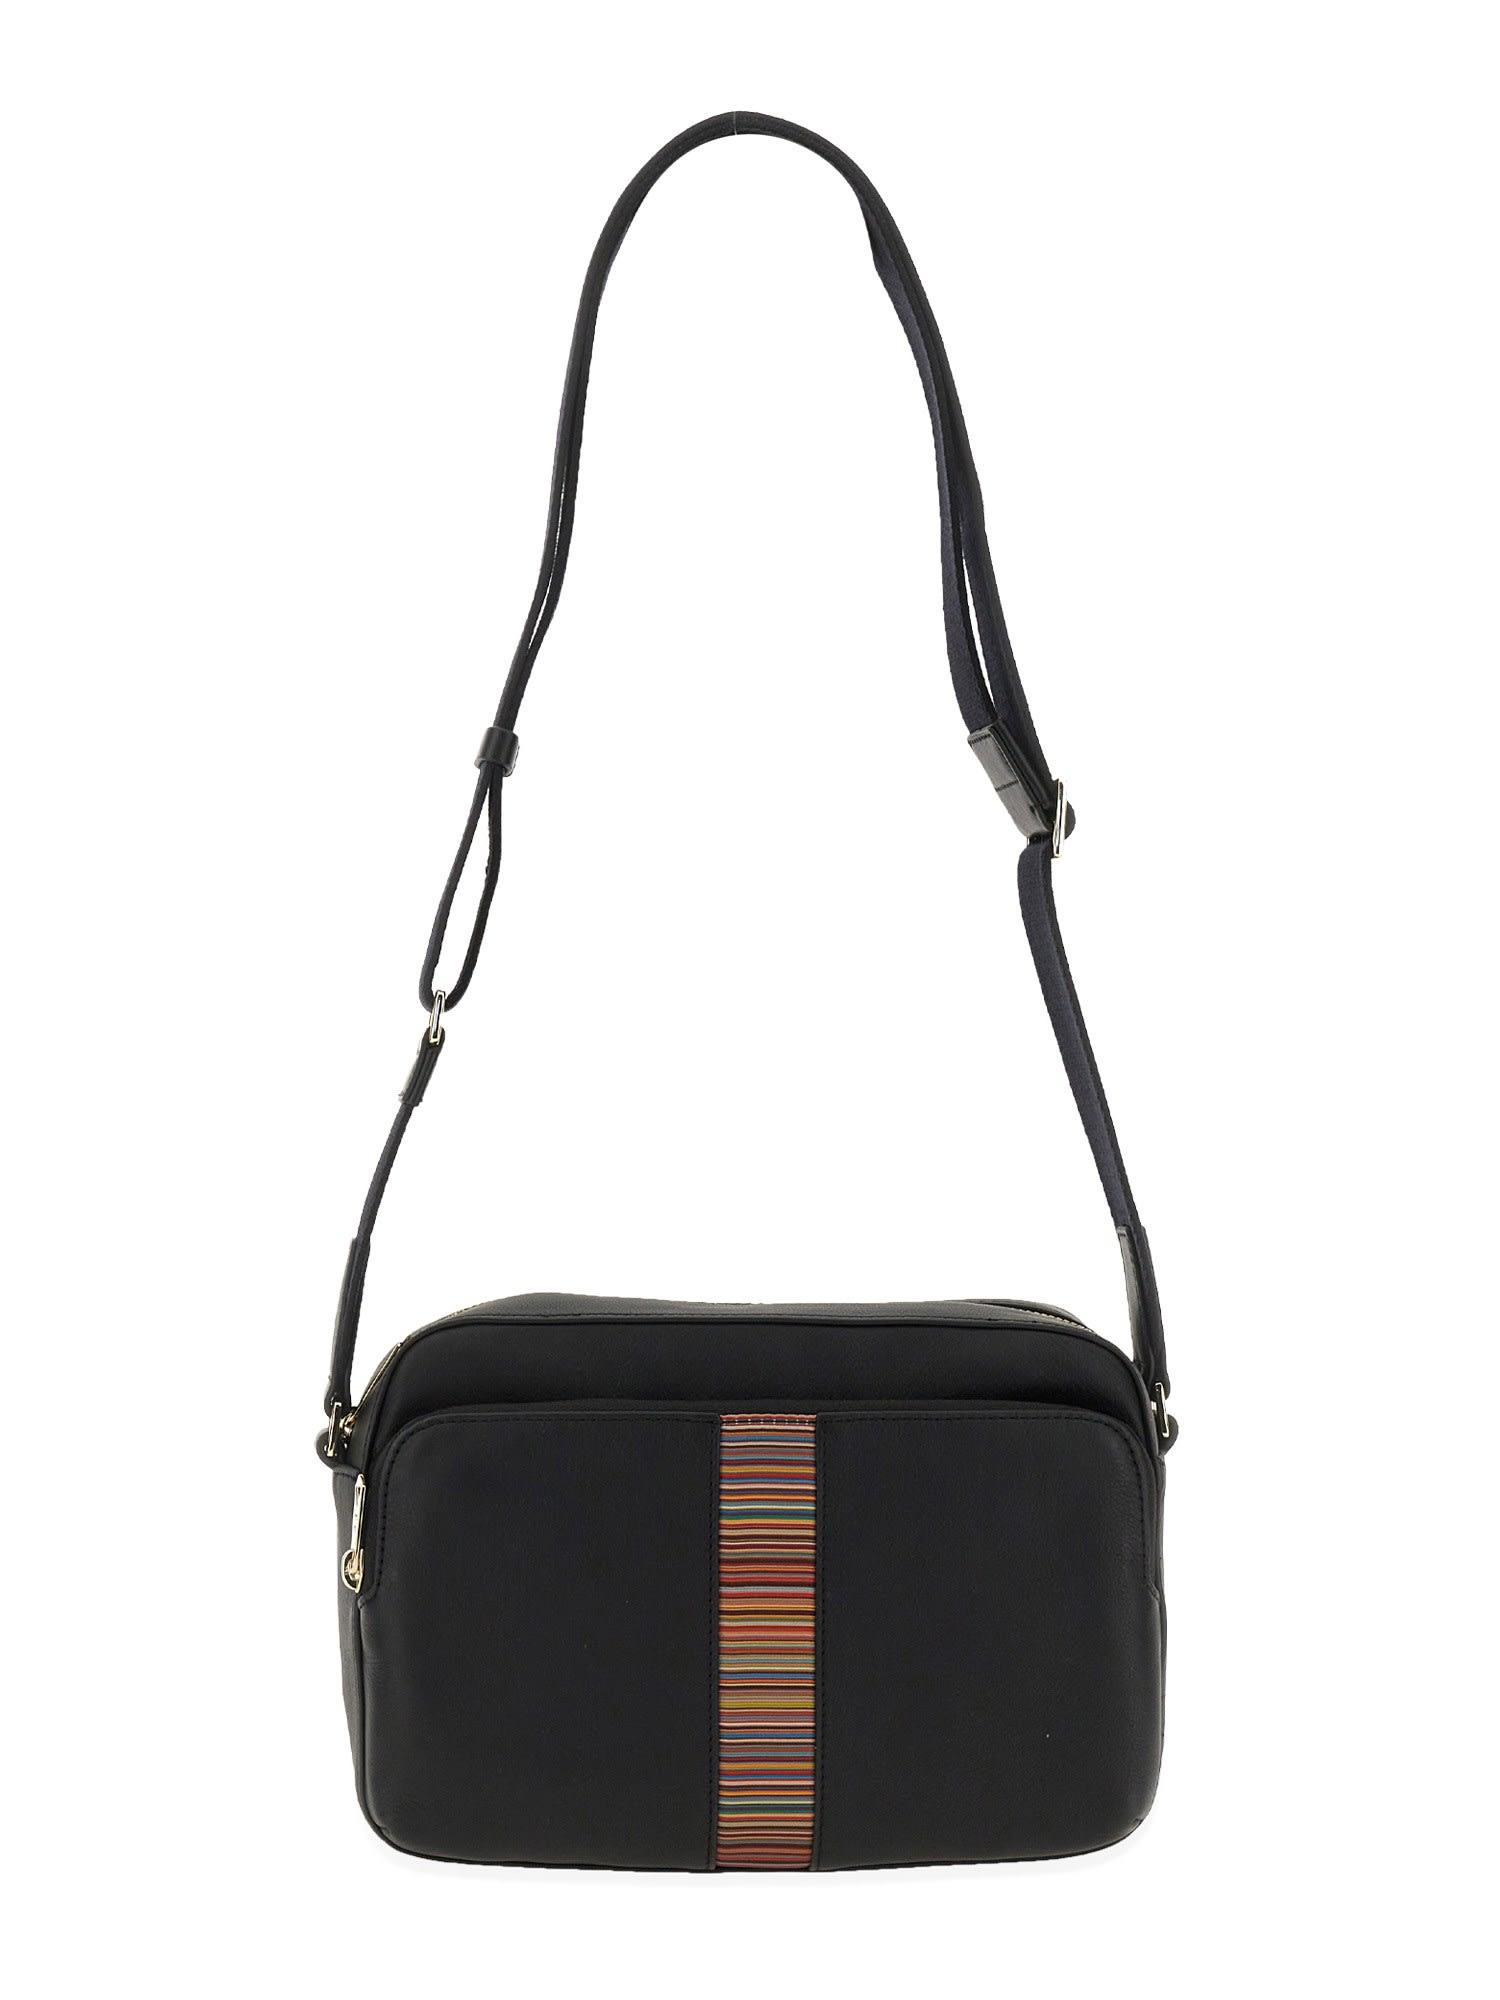 Paul Smith Messenger Bags for Men - Shop Now on FARFETCH